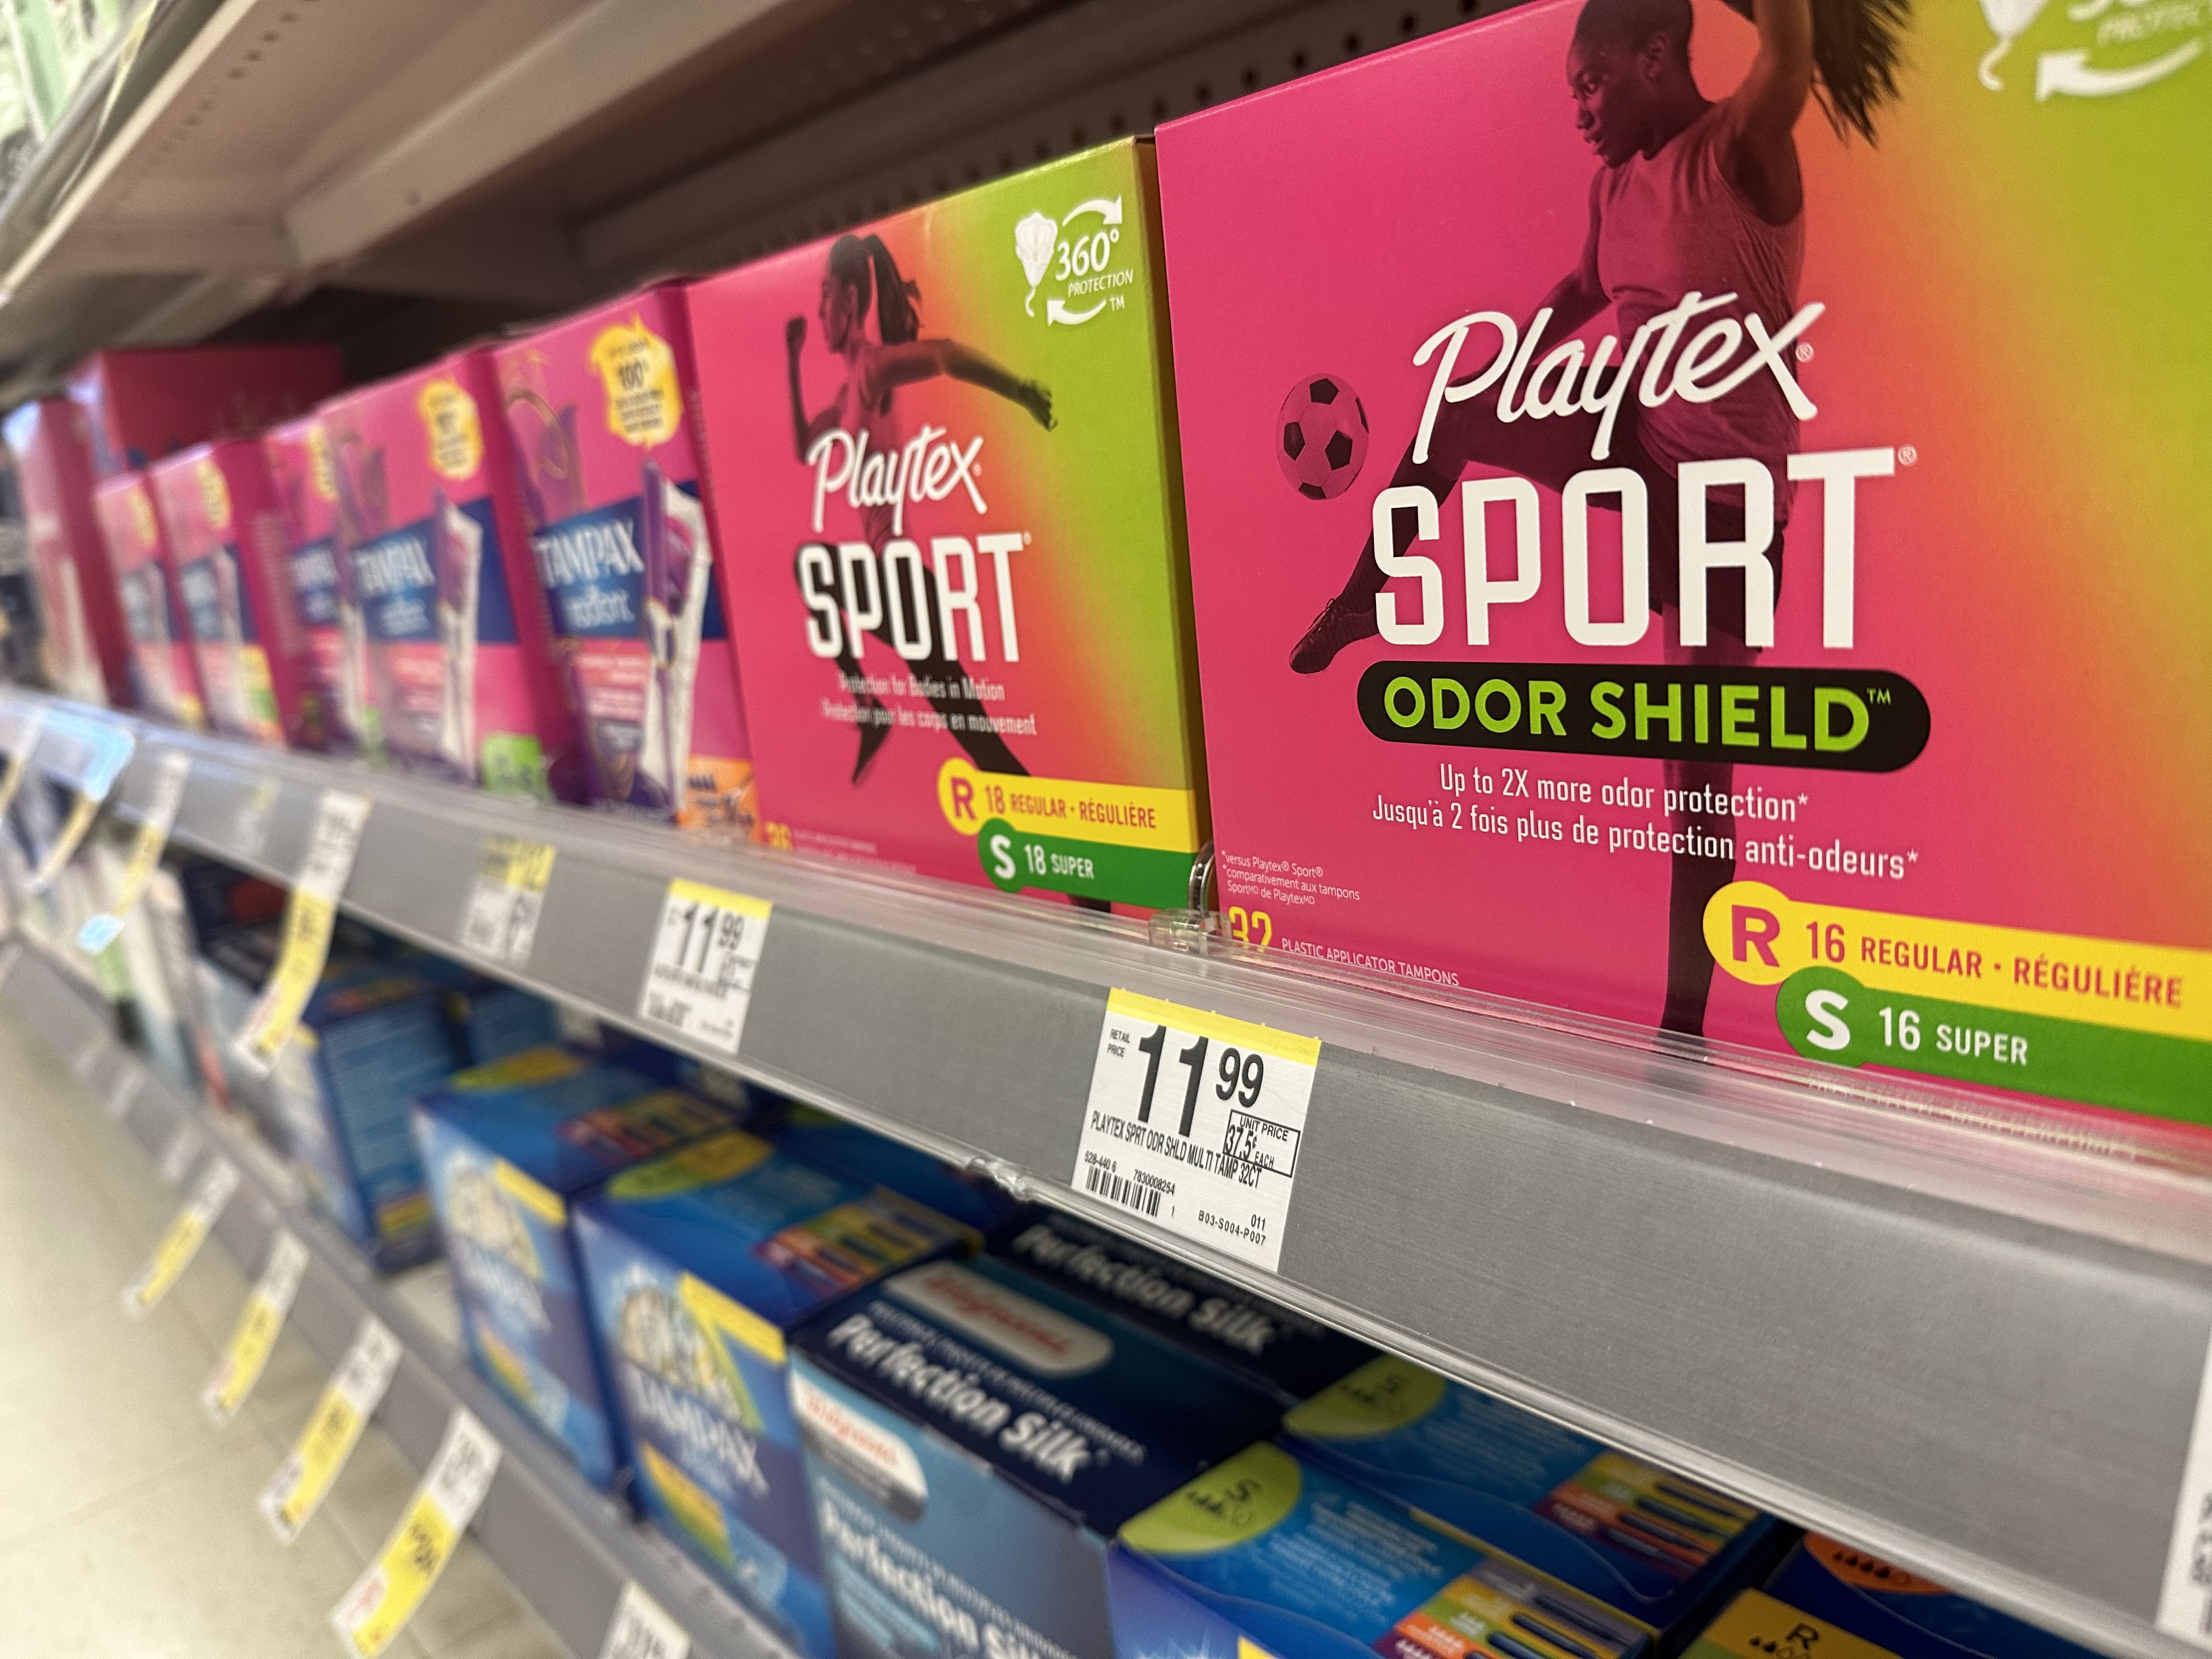 Colorful boxes of tampons sit on a store shelf. Their yellow price tags are visible.